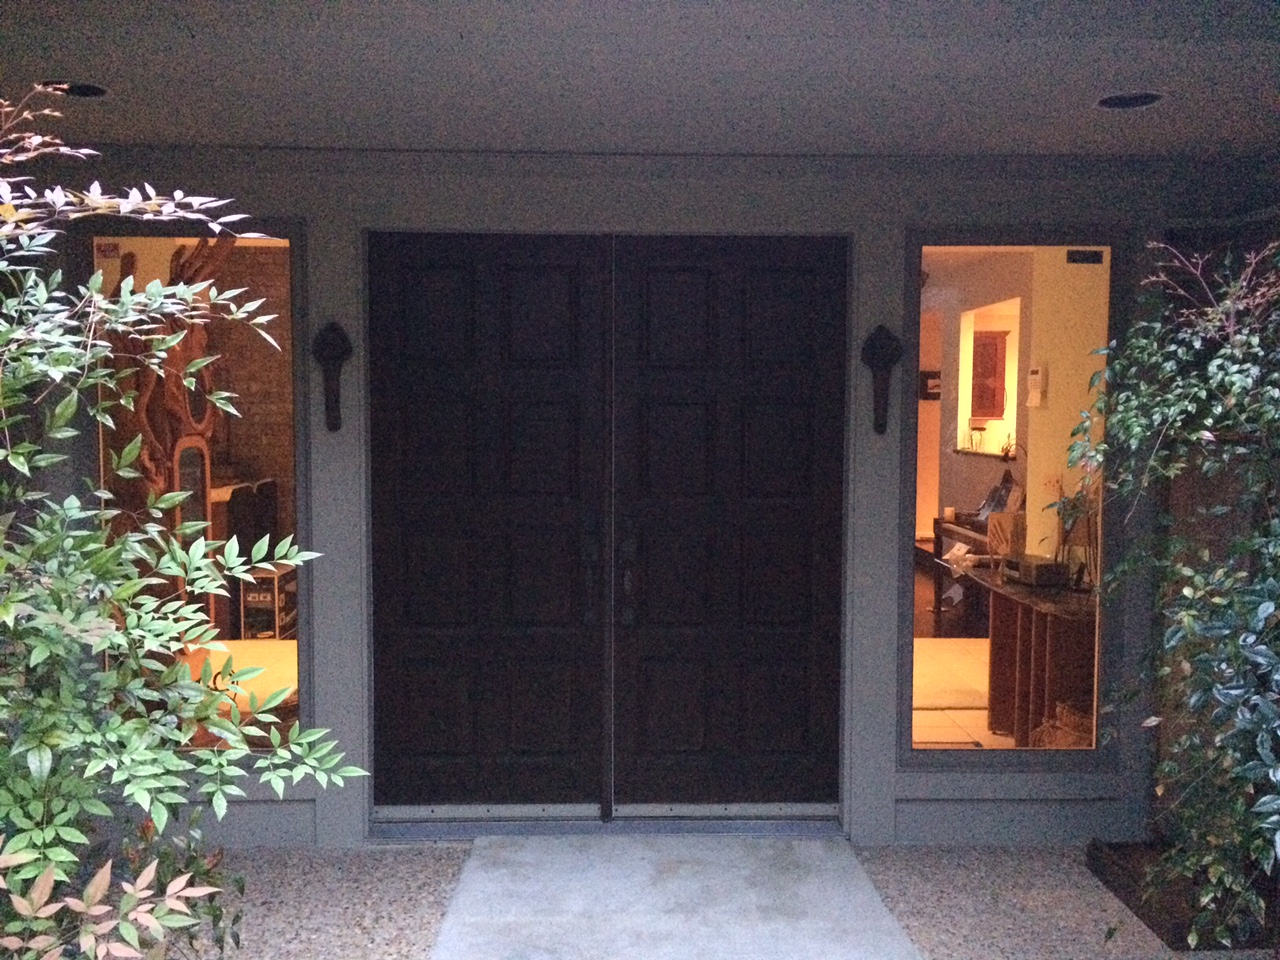 Incredible Entryway Transformation With Our Impact Resistant Stained Glass Door Inserts (Before)